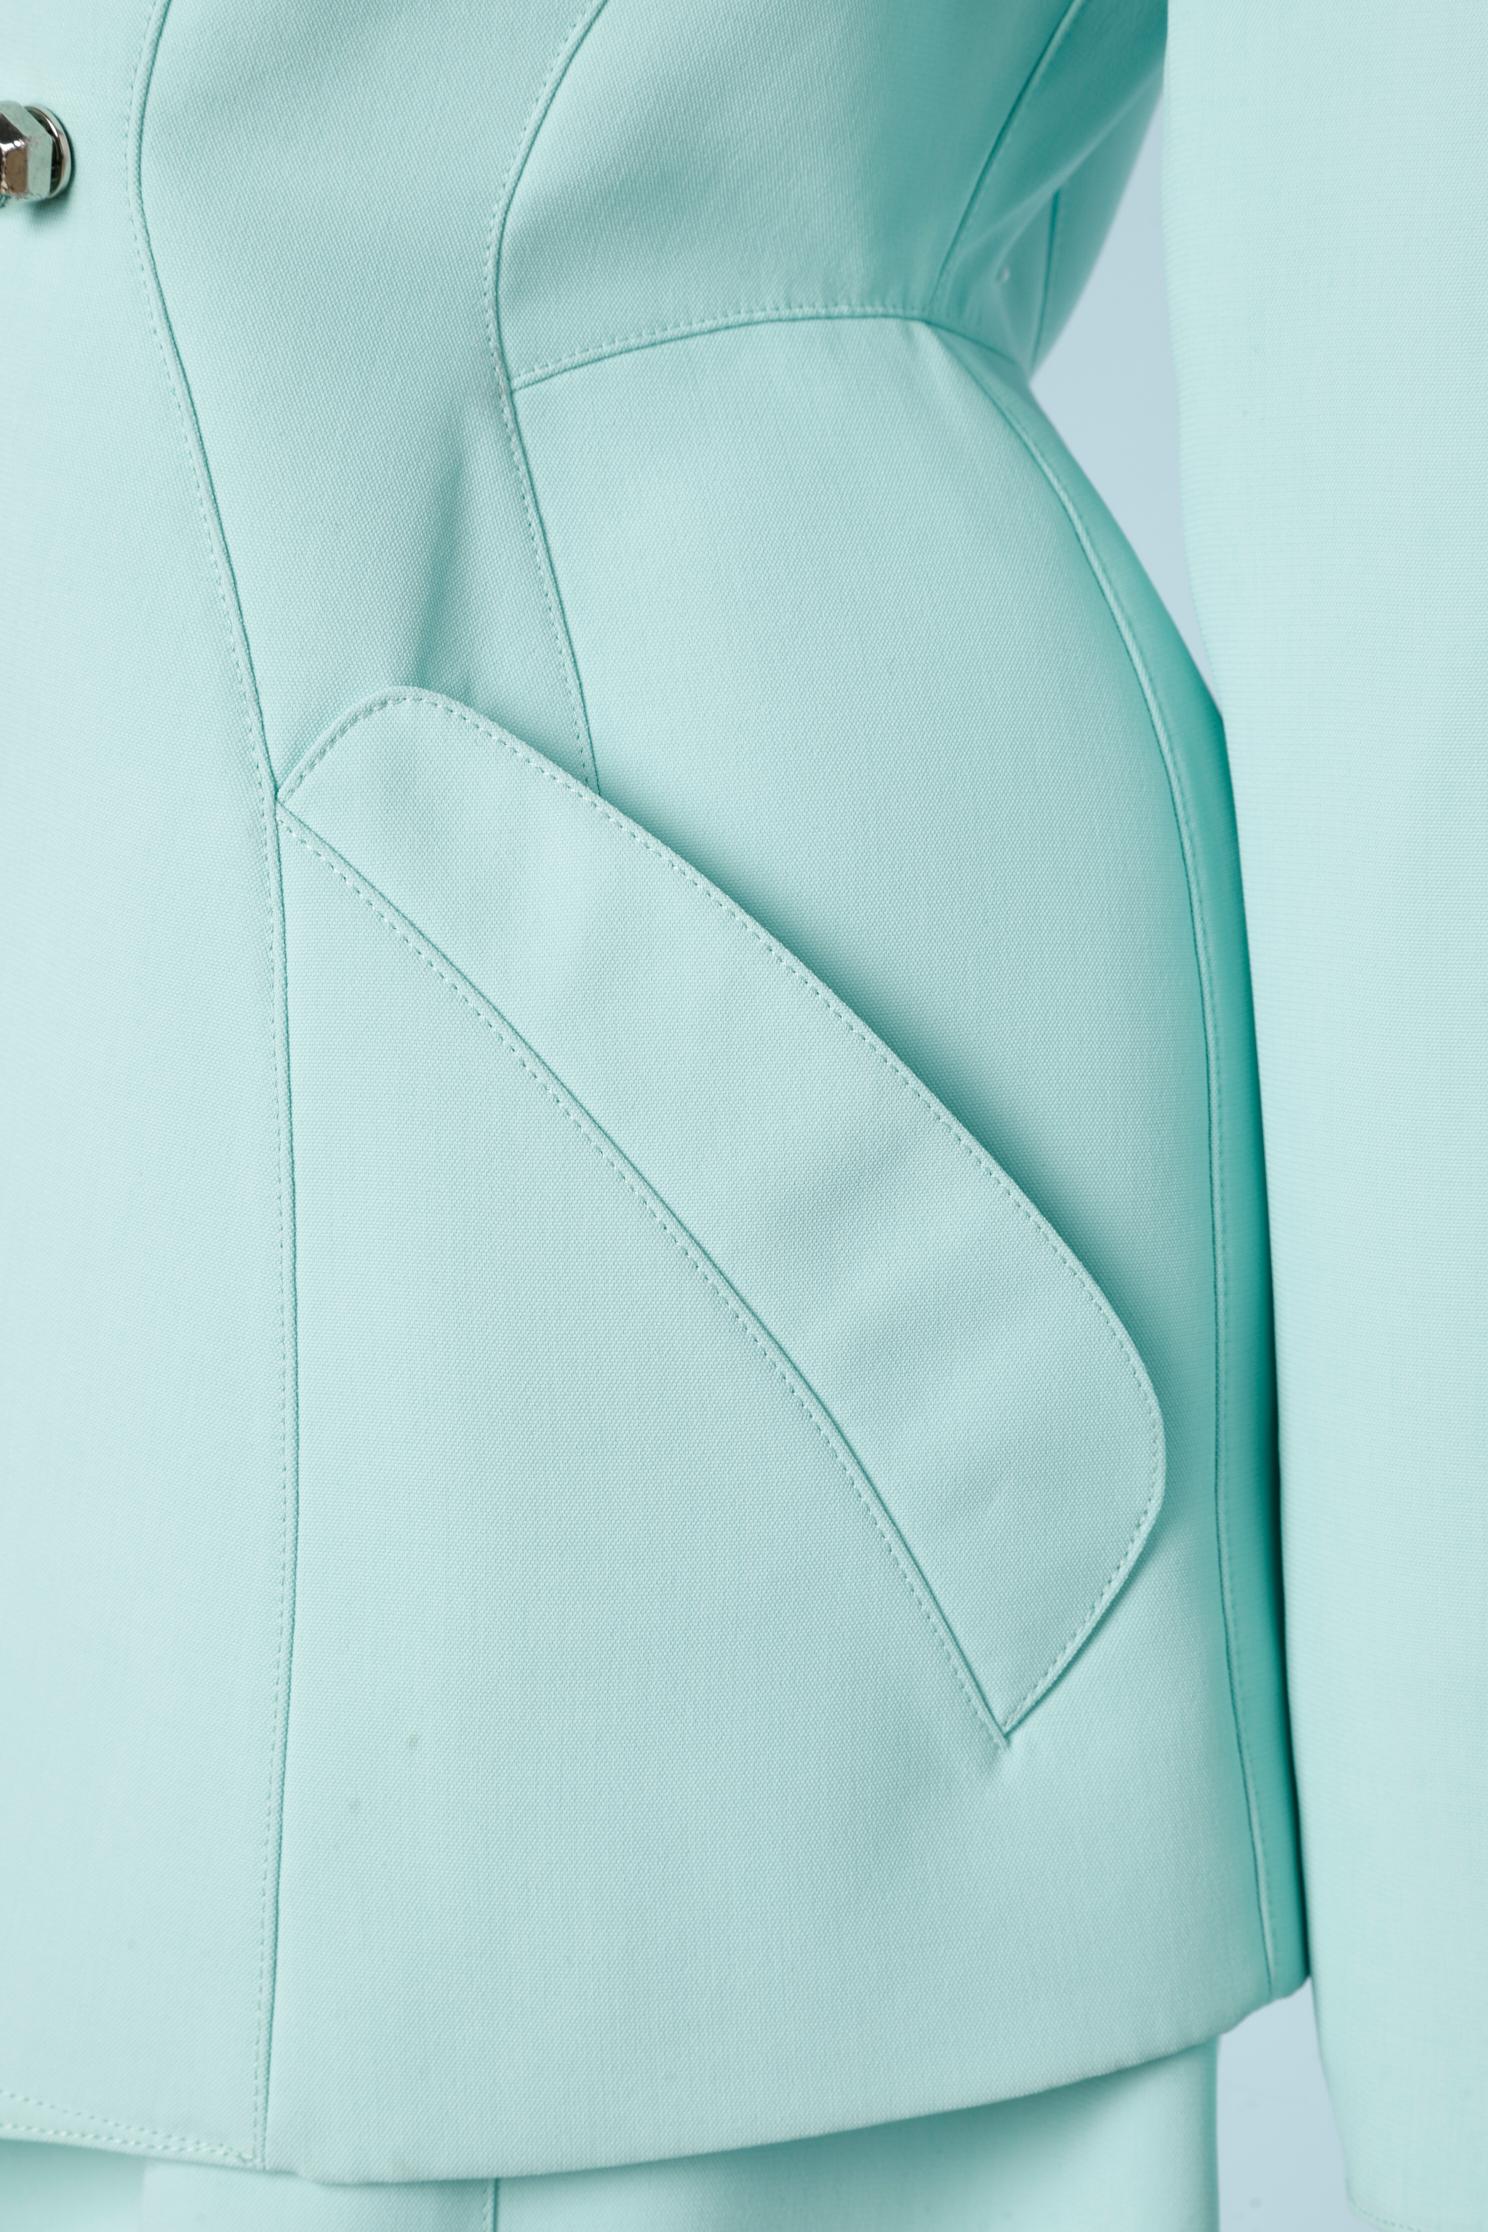 Blue Mint  skirt- suit with metal embellishment Thierry Mugler  For Sale